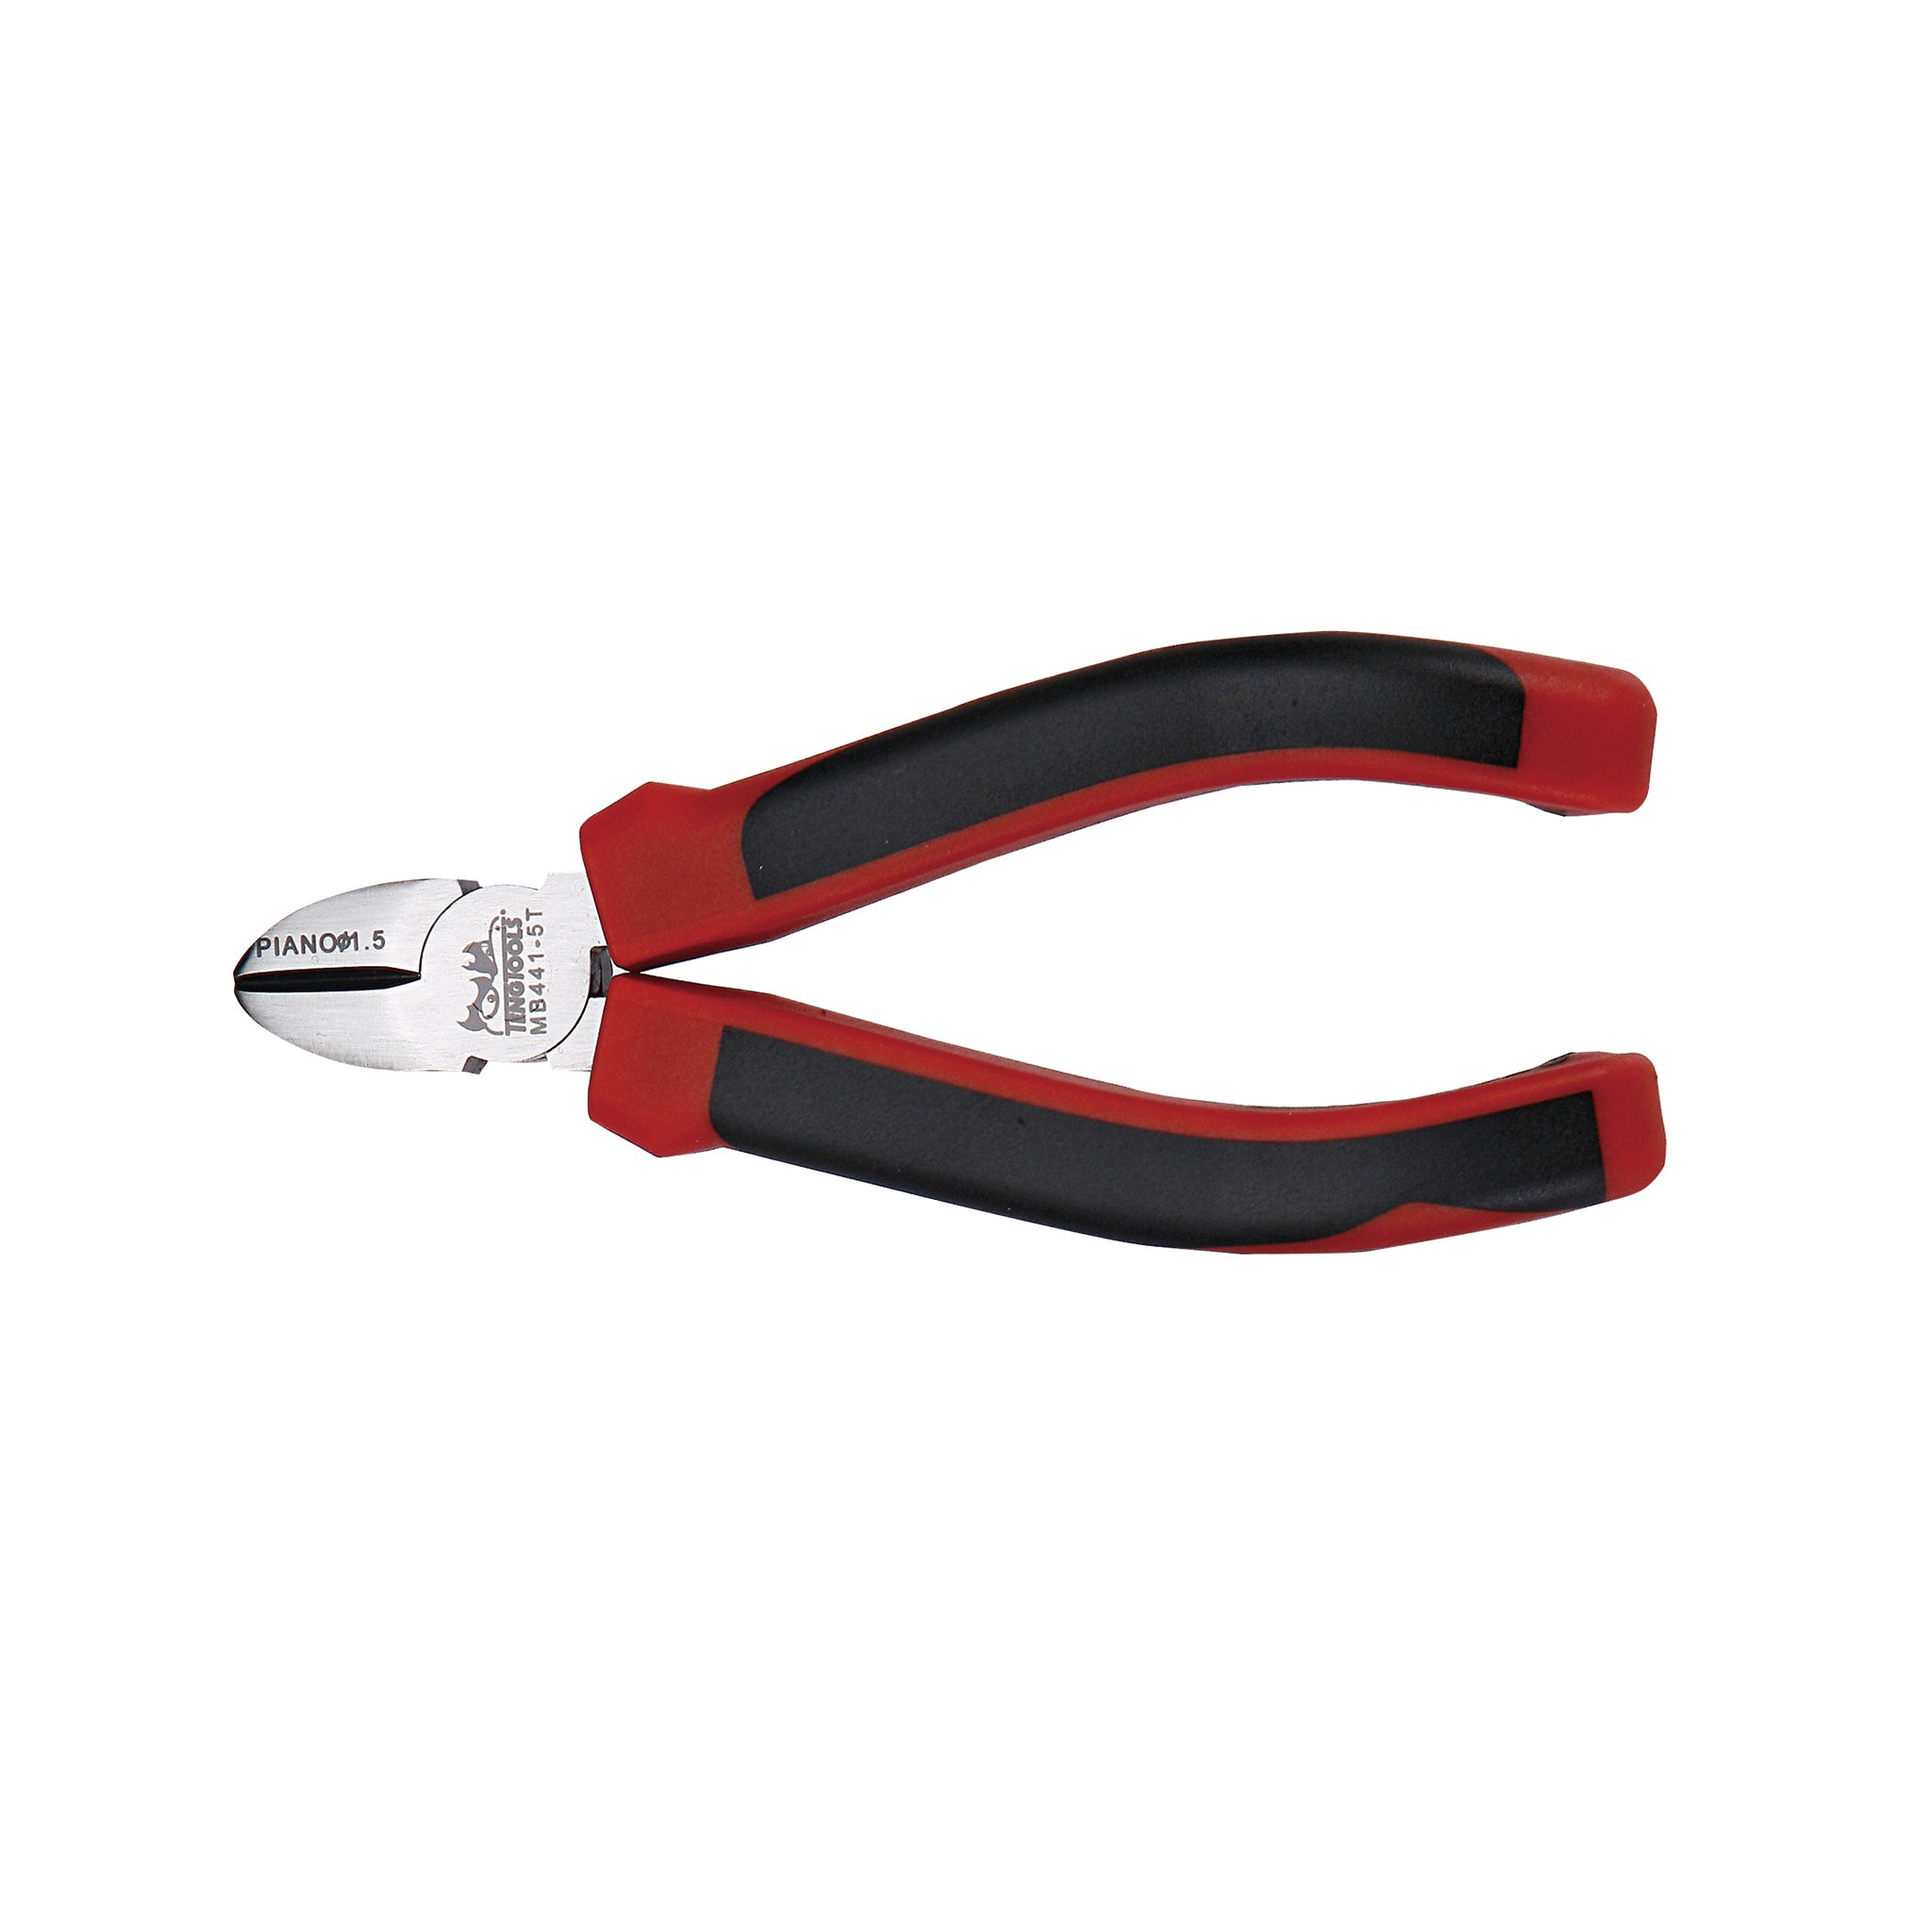 Teng Tools Side Cutter Pliers With TPR Grip Handles - 5